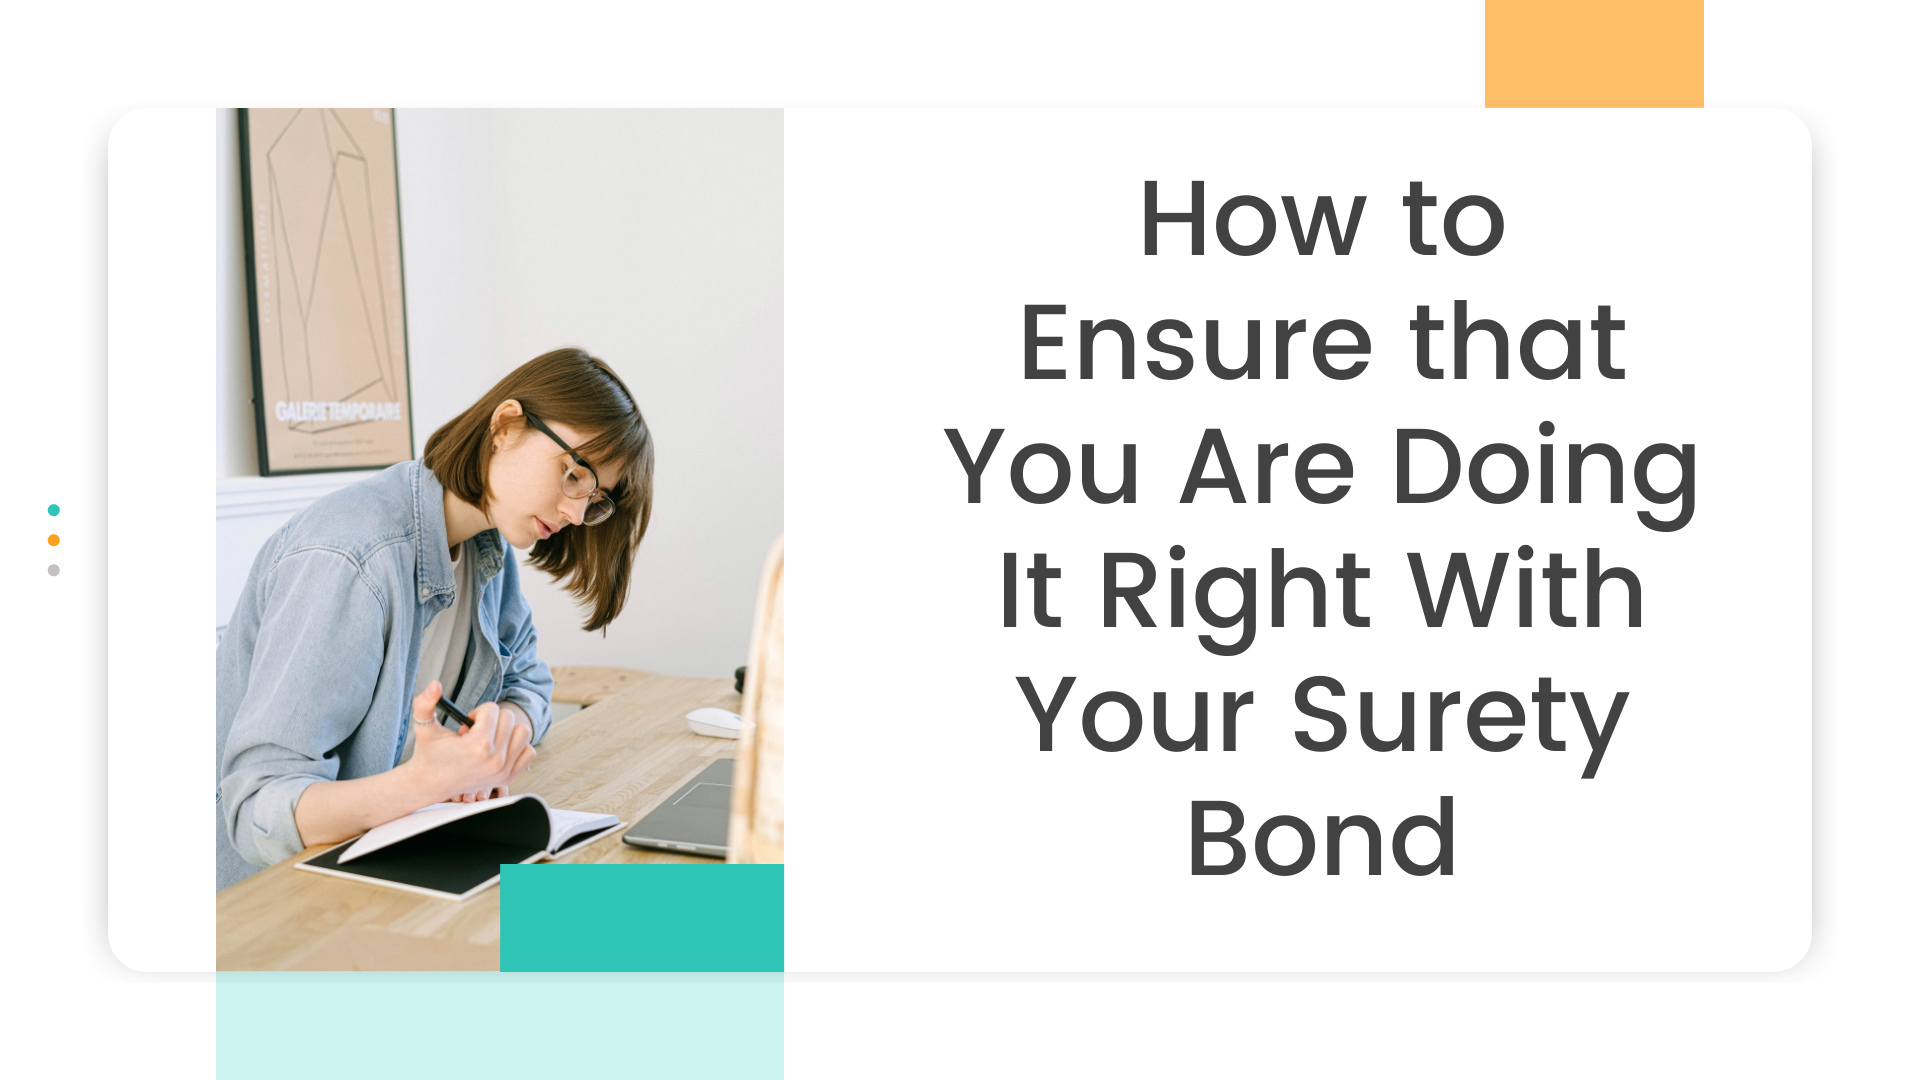 surety bond - What is the definition of a surety bond - girl writing